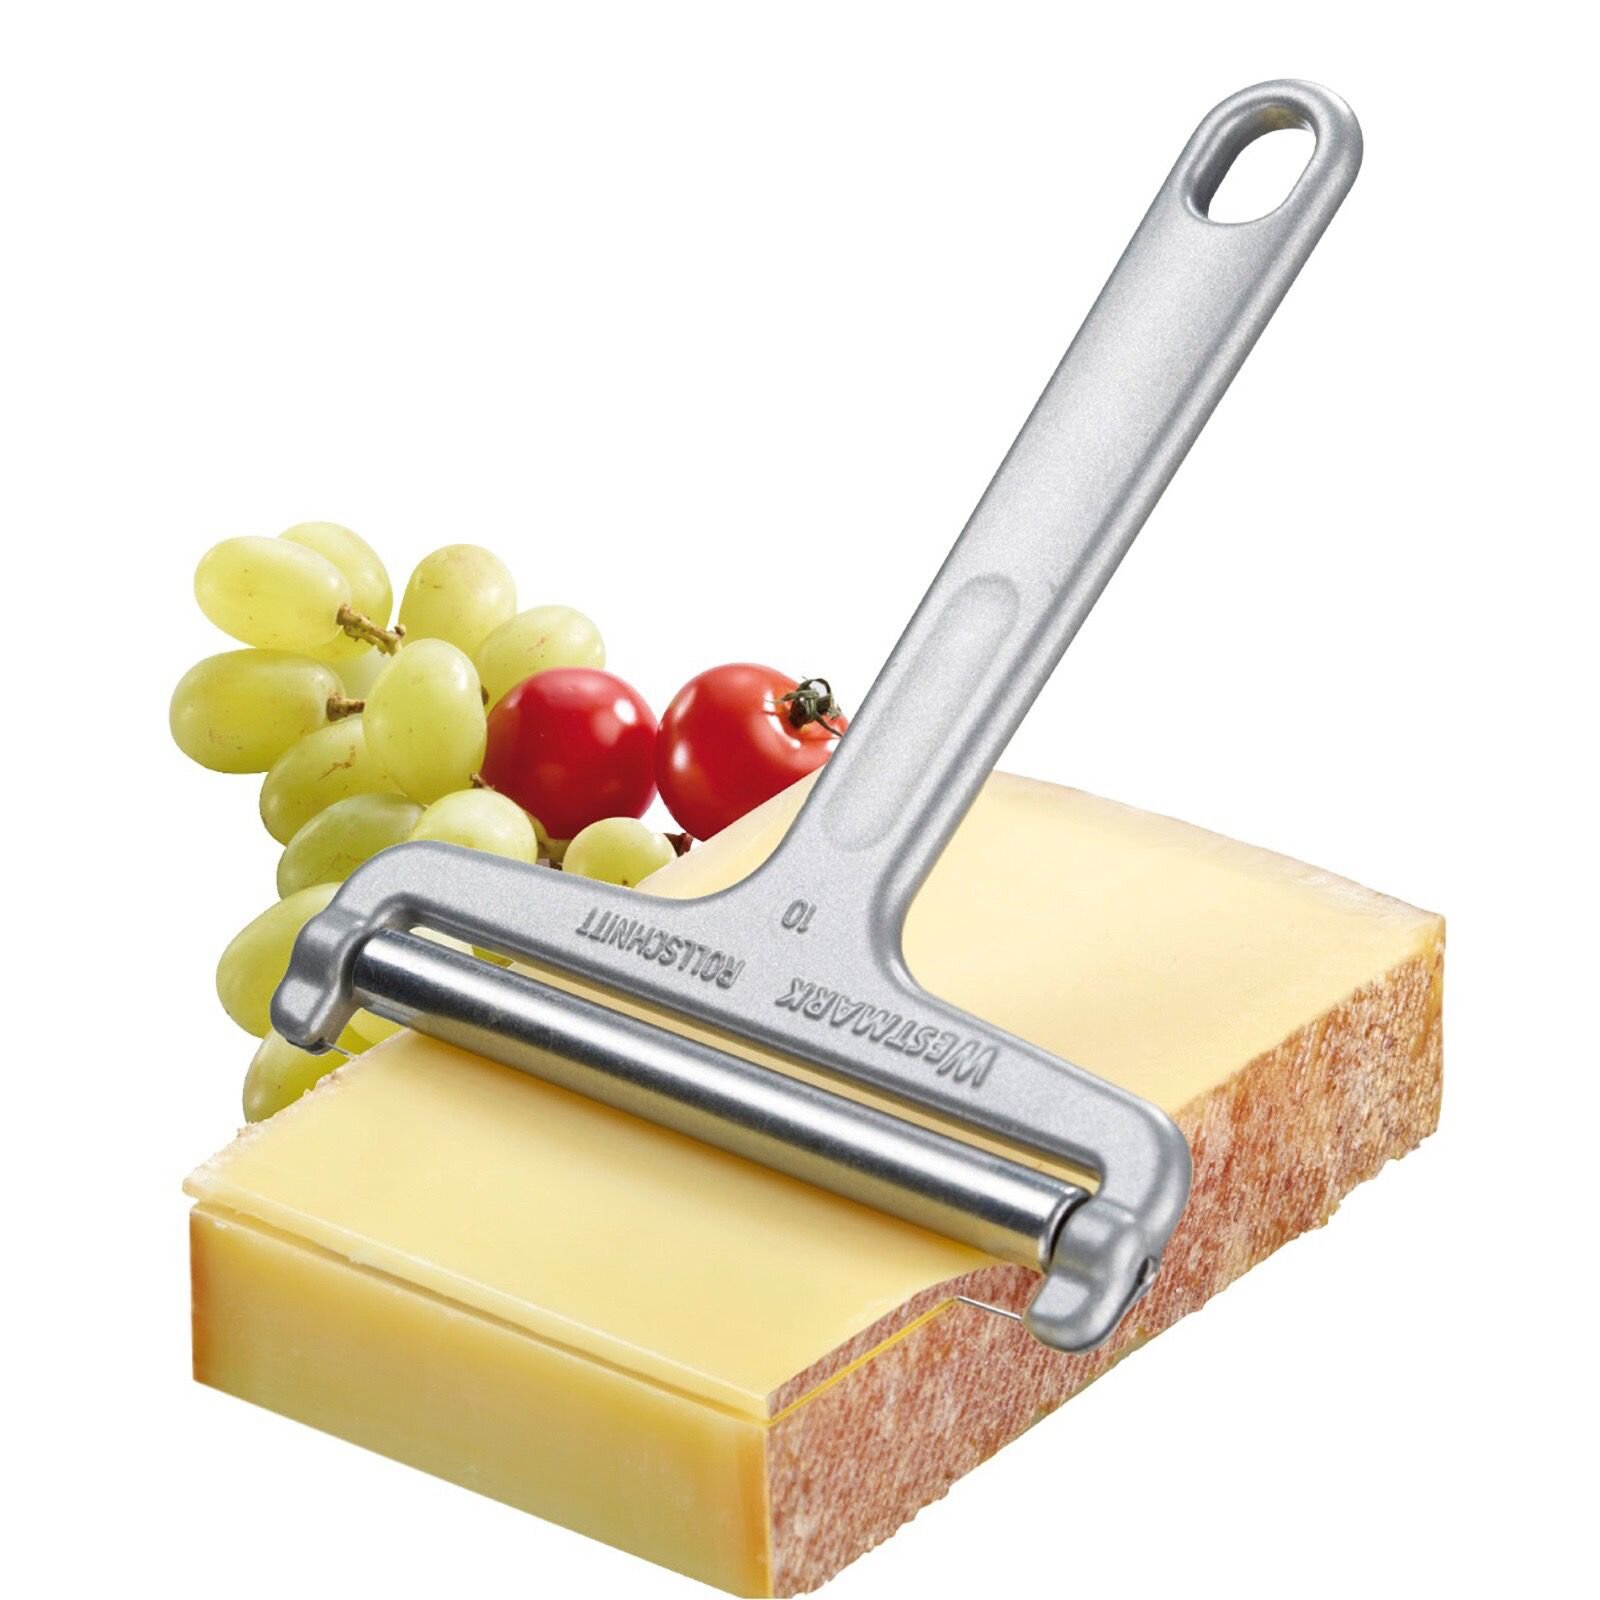 Cheese Slicer Handheld - Cheese Cutter, Cheese Slicers for Block Cheese  Heavy Duty, Wire Cheese Slicer, Adjustable Cheese Slicer, Cheese Wire  Cutter